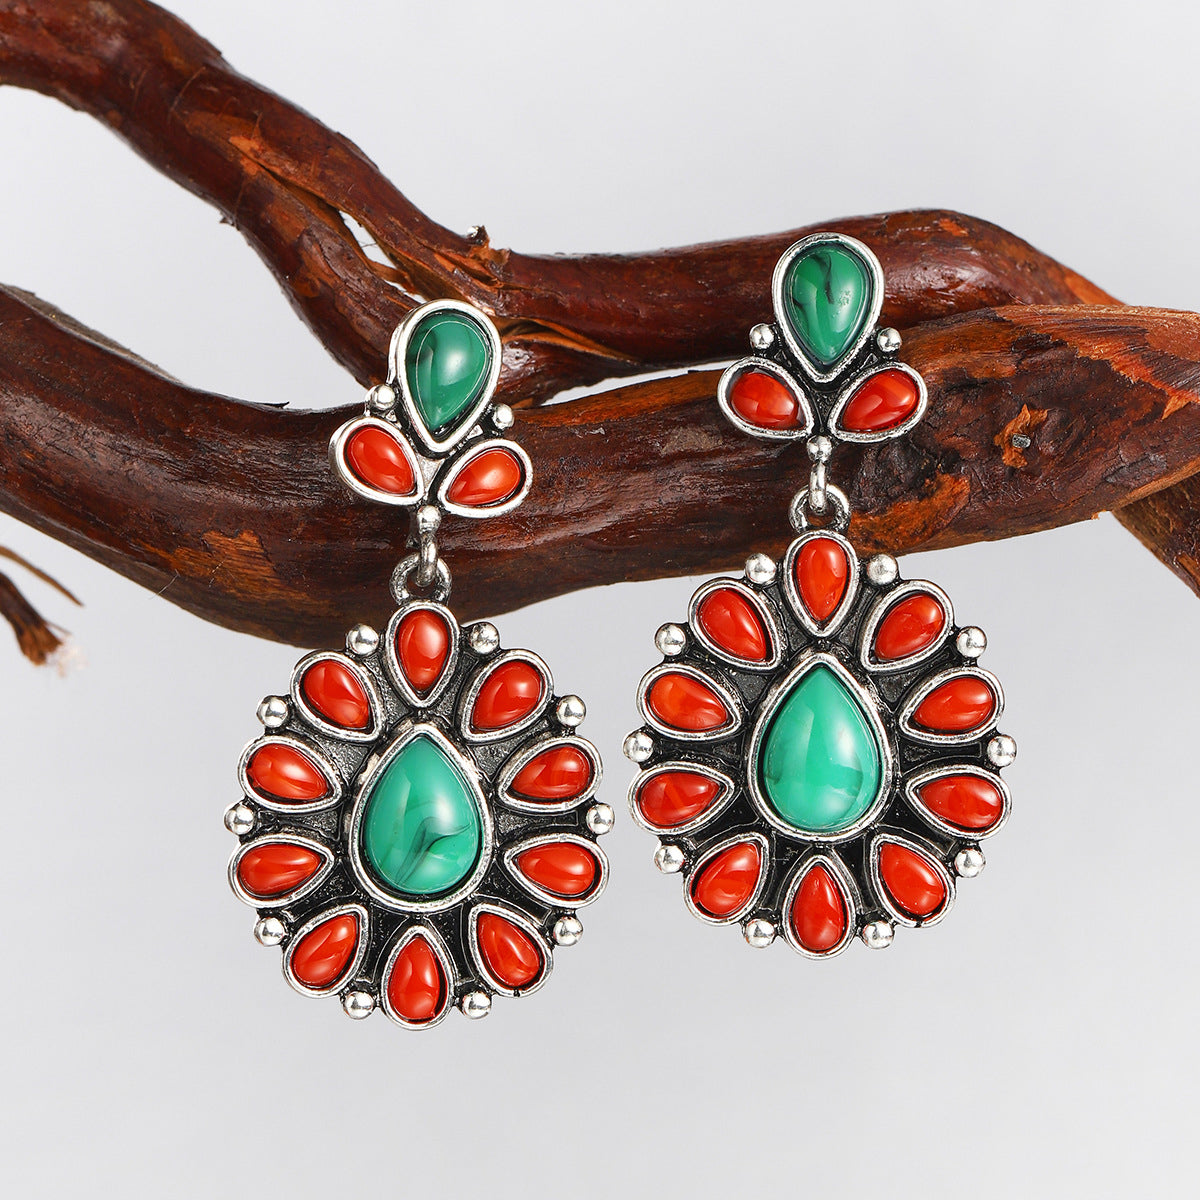 Red Resin & Turquoise Silver-Plated Oval Drop Earrings